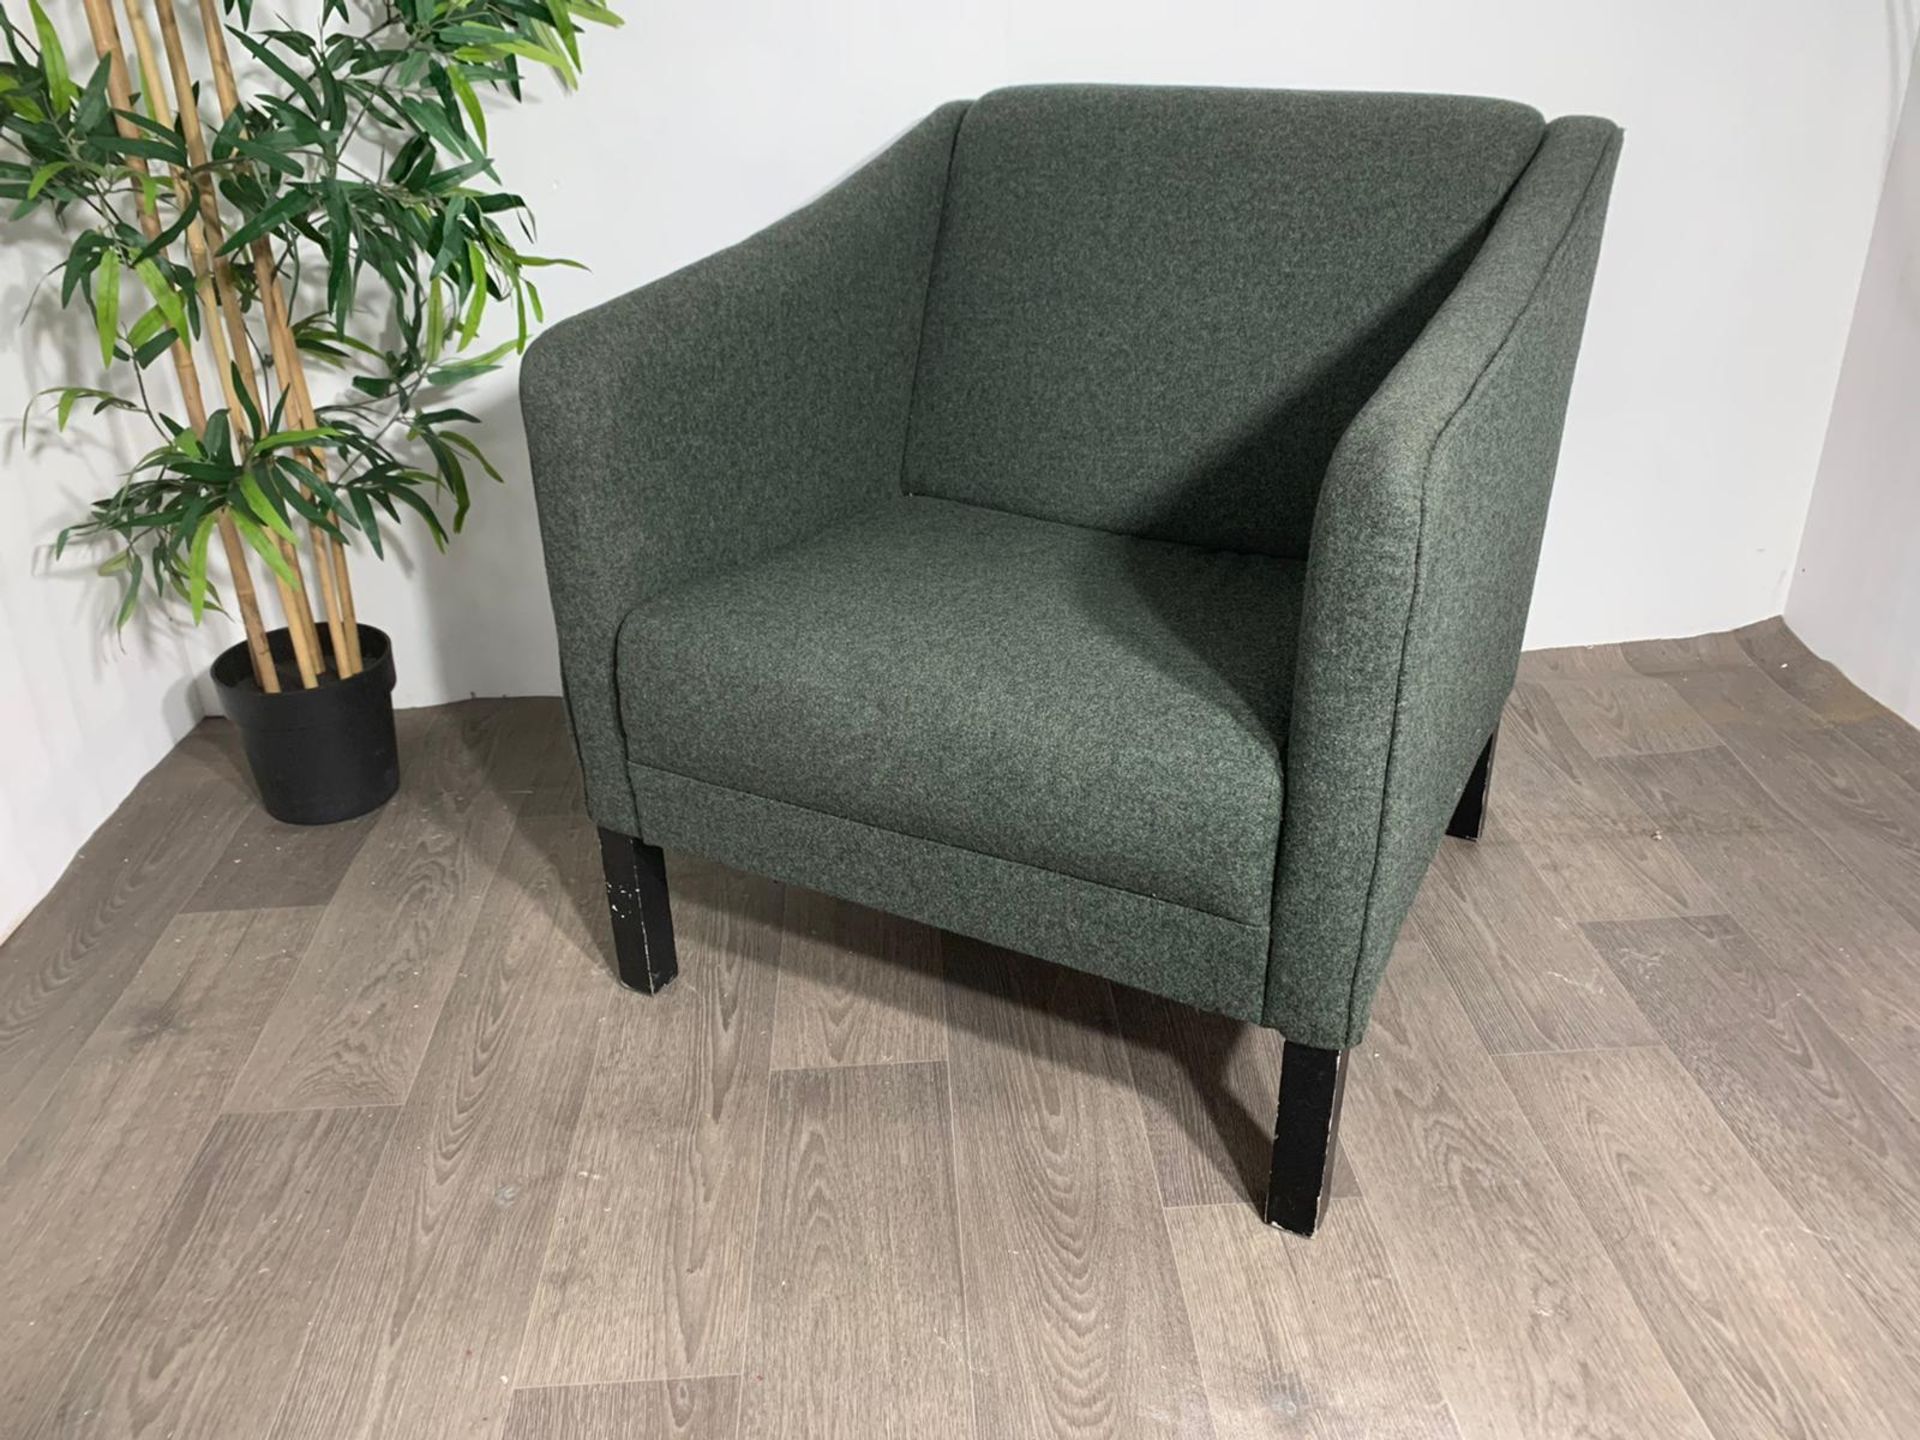 Green Commercial Grade Lounge Chair - Image 6 of 6